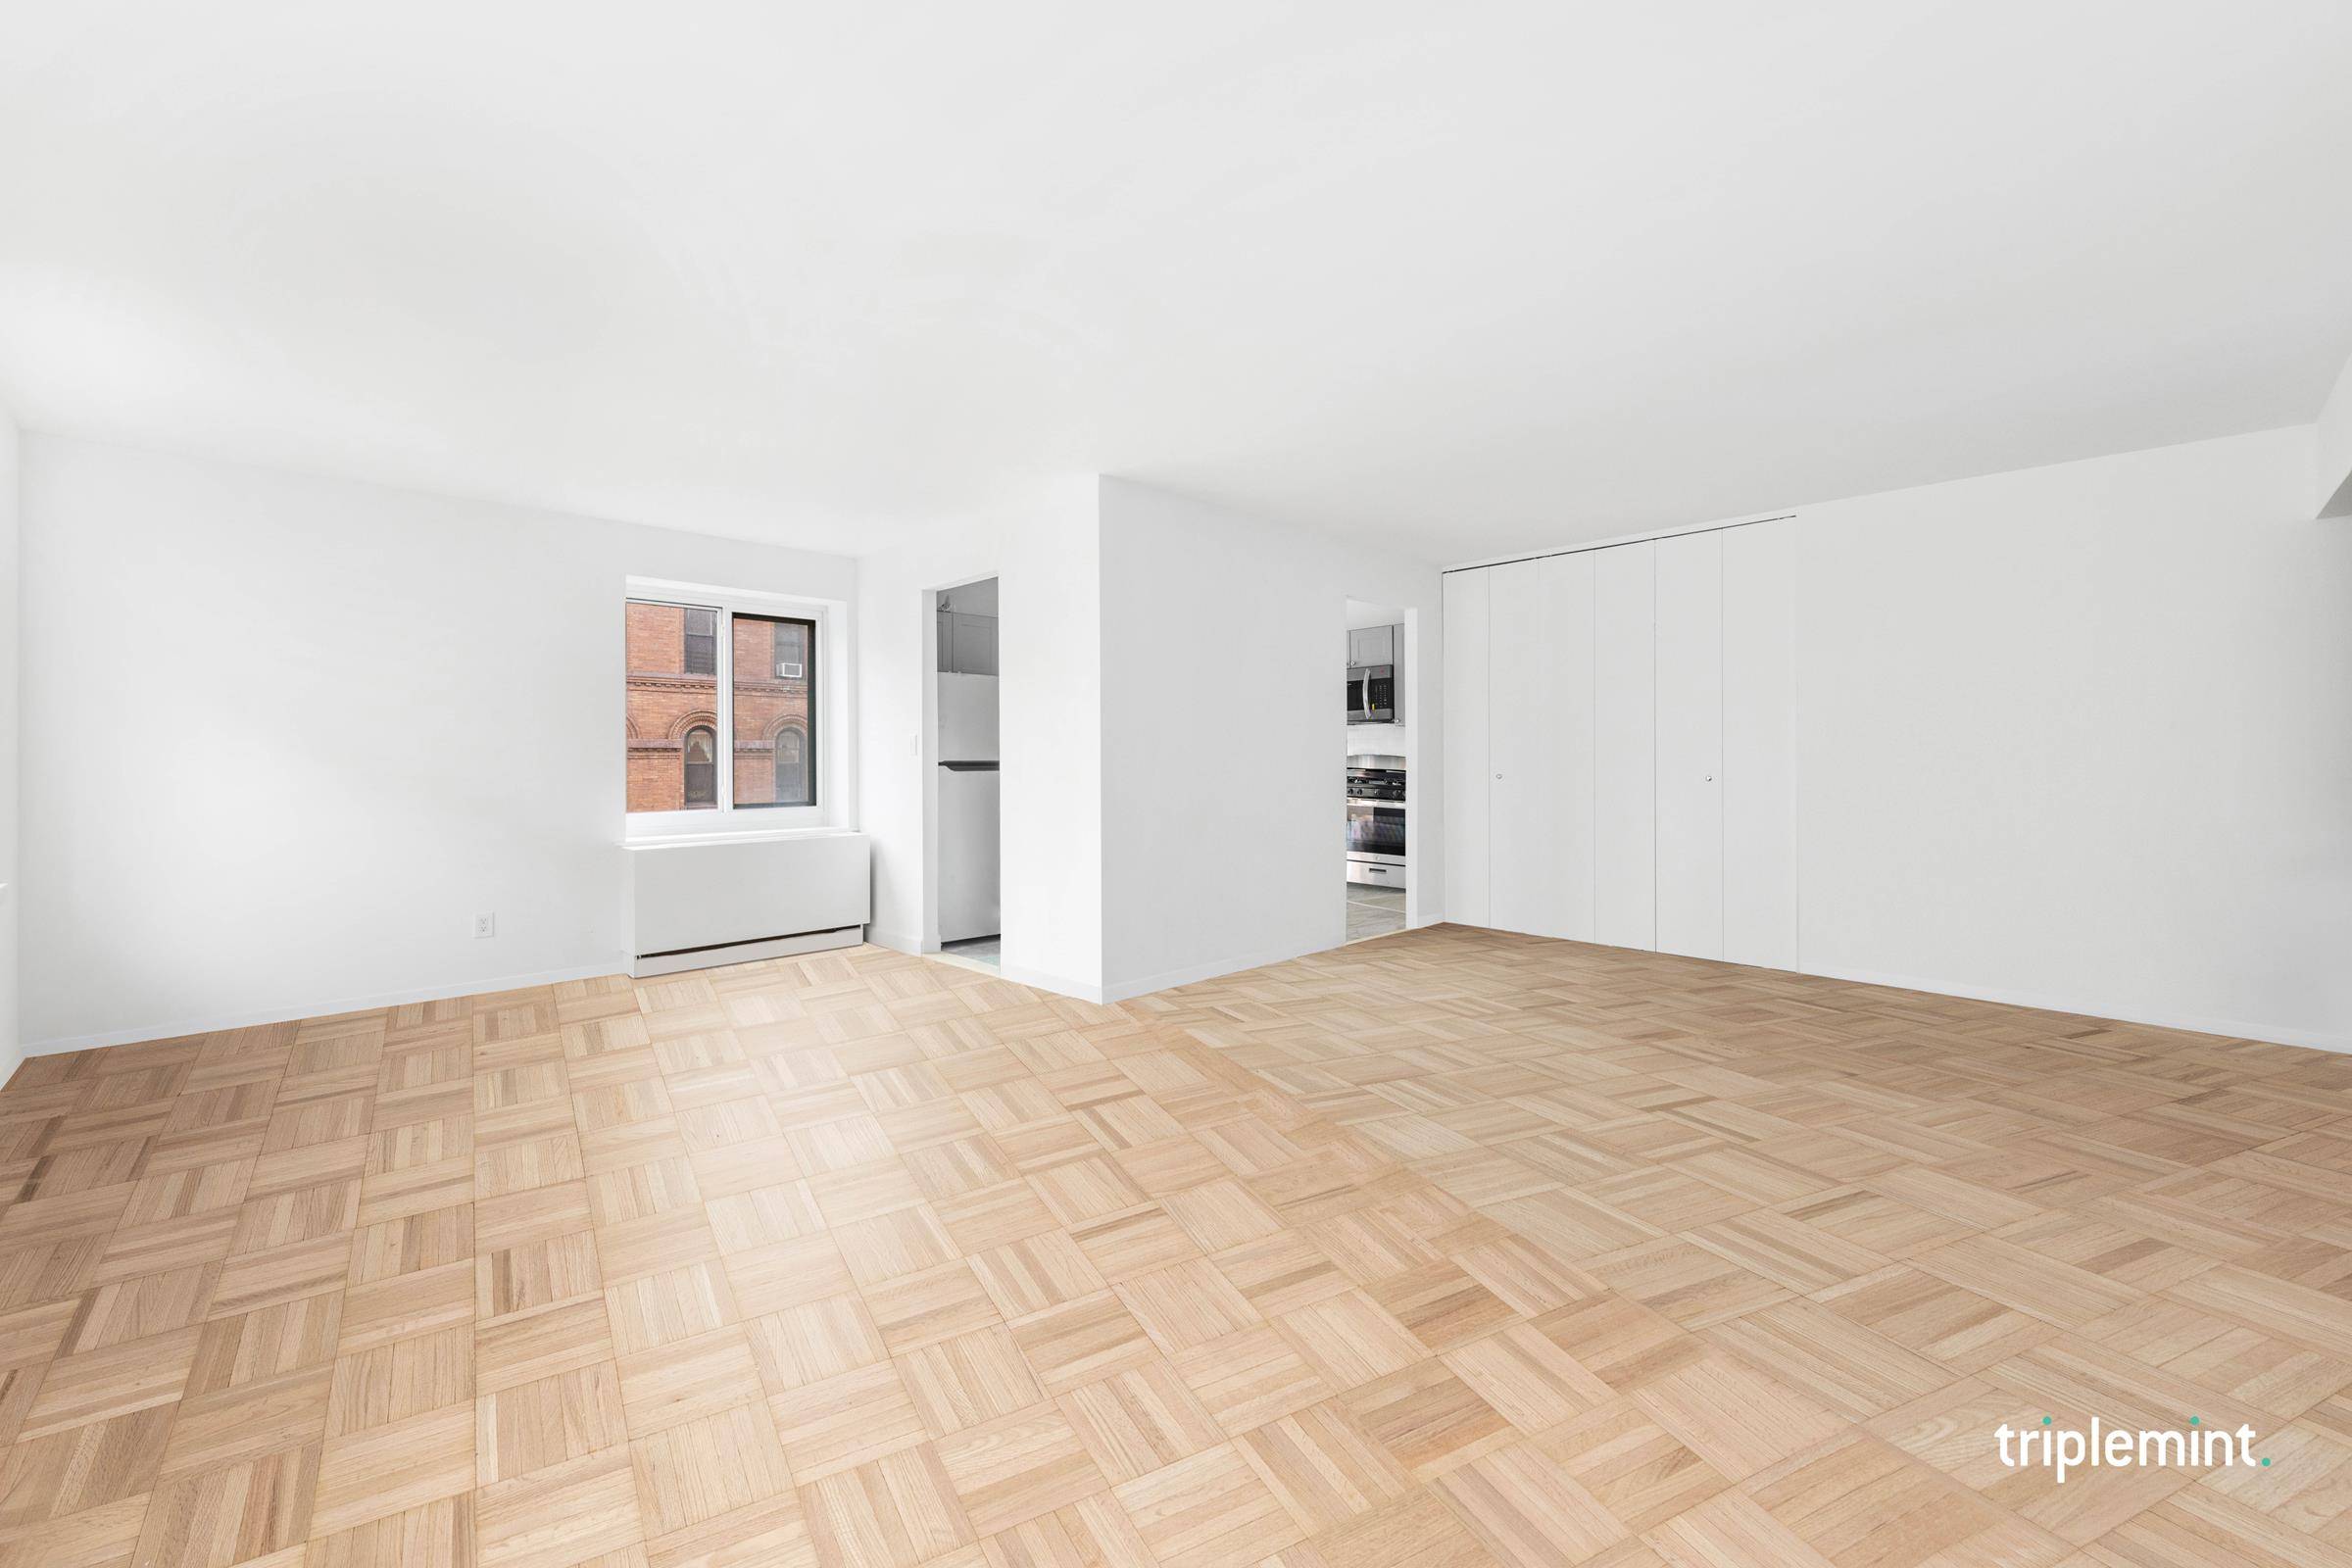 Welcome home to apartment 3E, a sunny, spacious and newly renovated two bedroom with dining area located in an amenity rich condo in the heart of the Upper West Side.